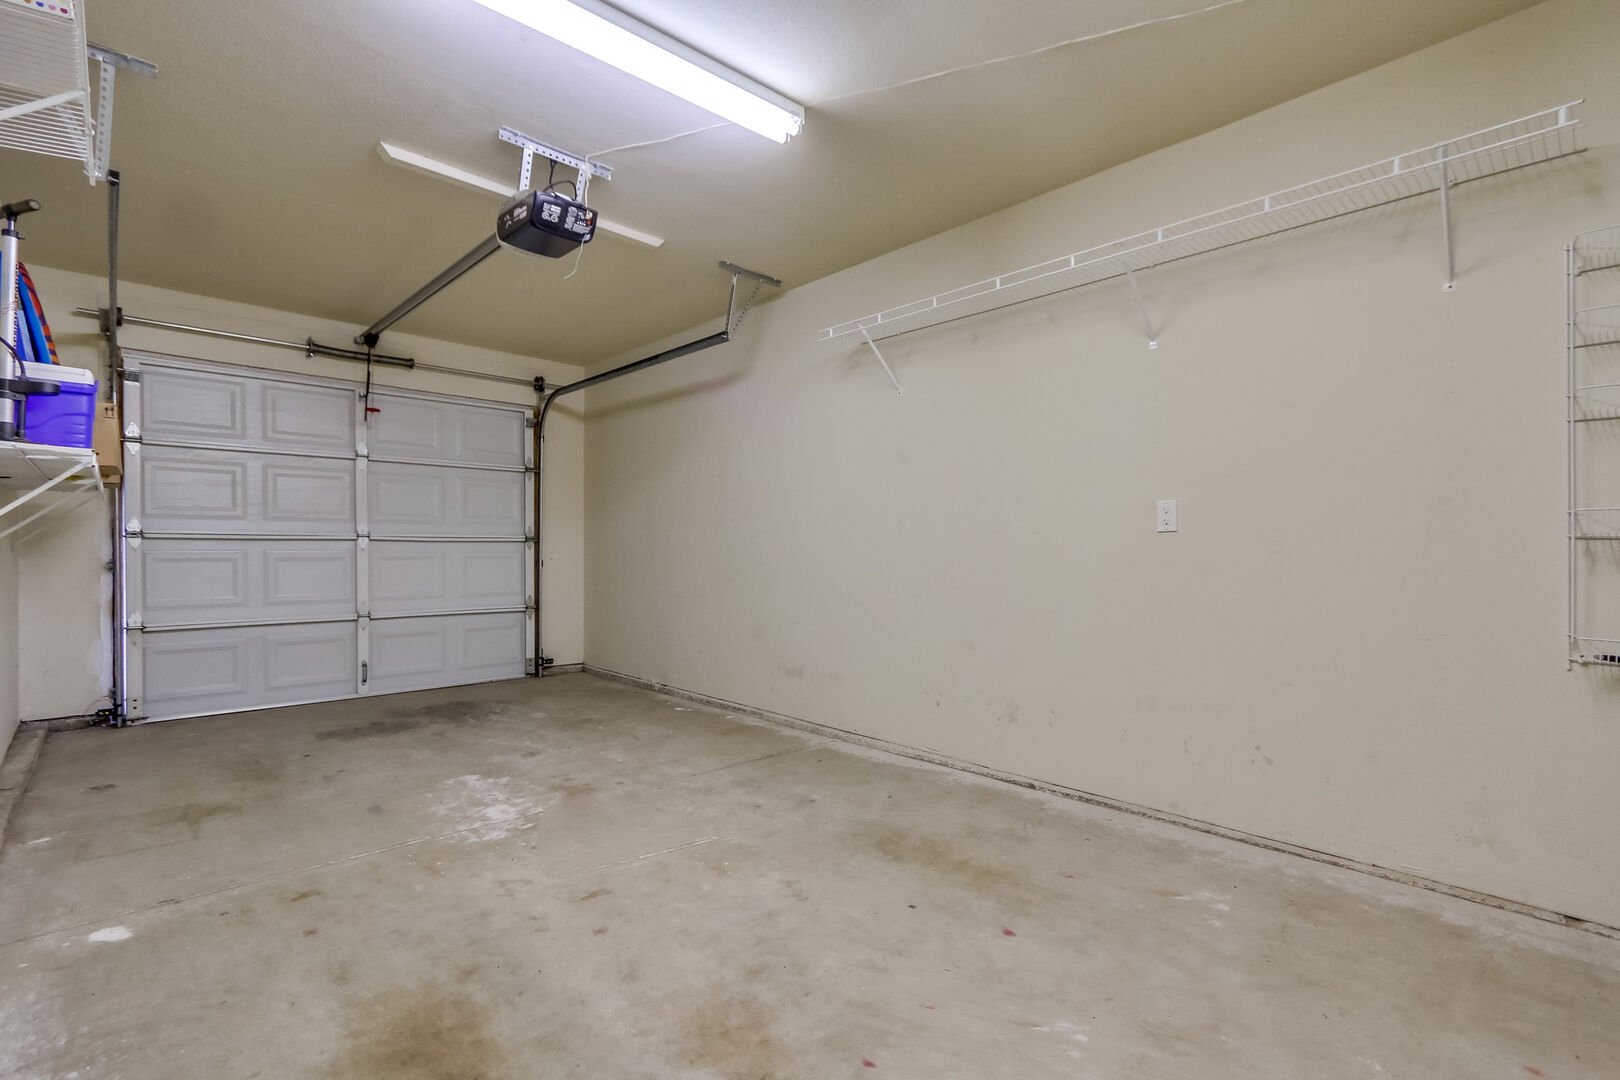 Garage with storage and parking for 1 vehicle and driveway parking for 1 vehicle